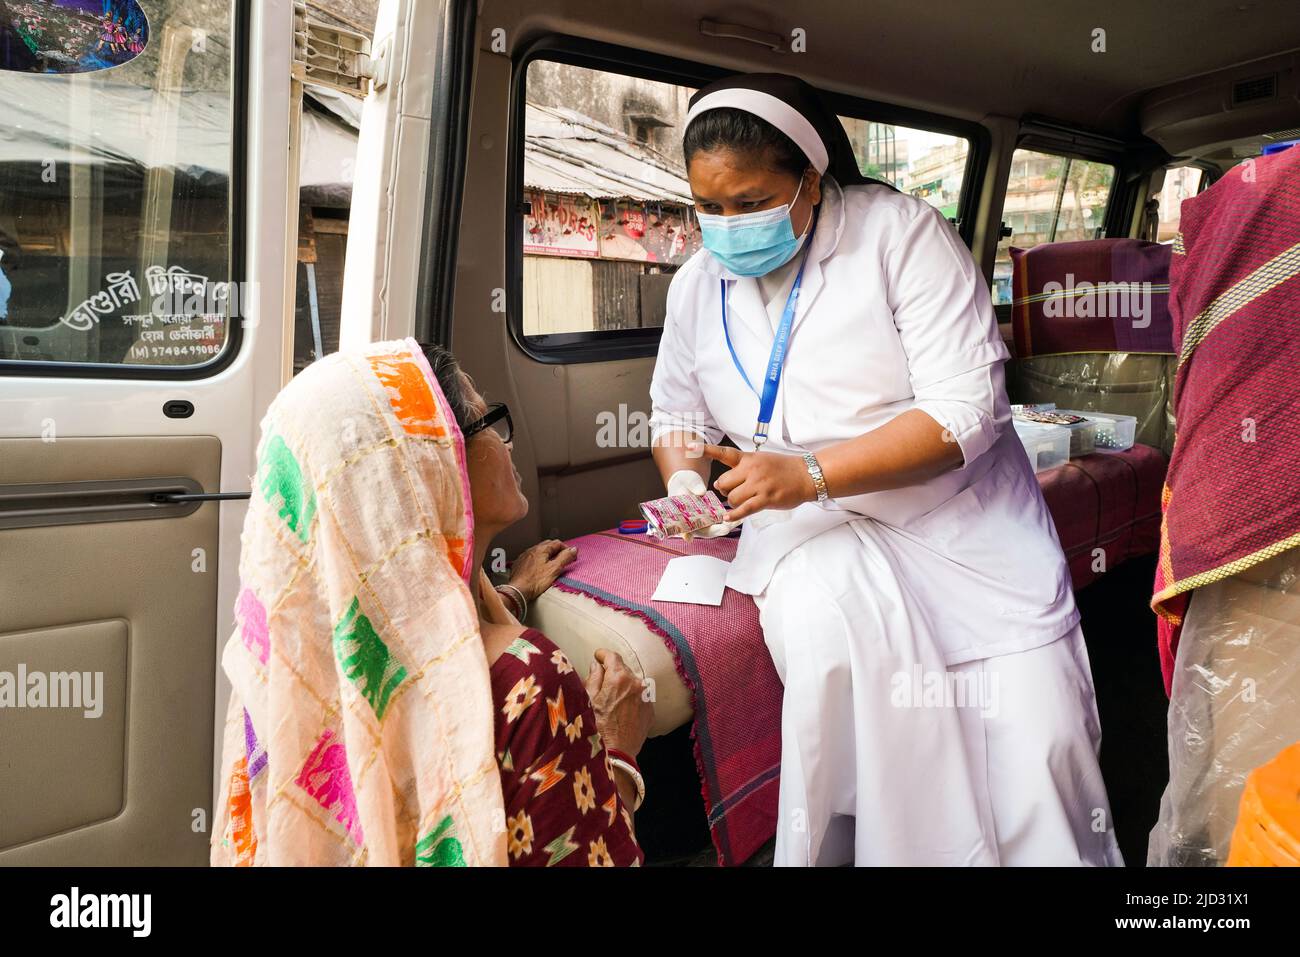 a Catholic sister counsels poor people from a slum on health issues at the Asha Deep Trust's Mobile Clinic in Kolkata, India Stock Photo